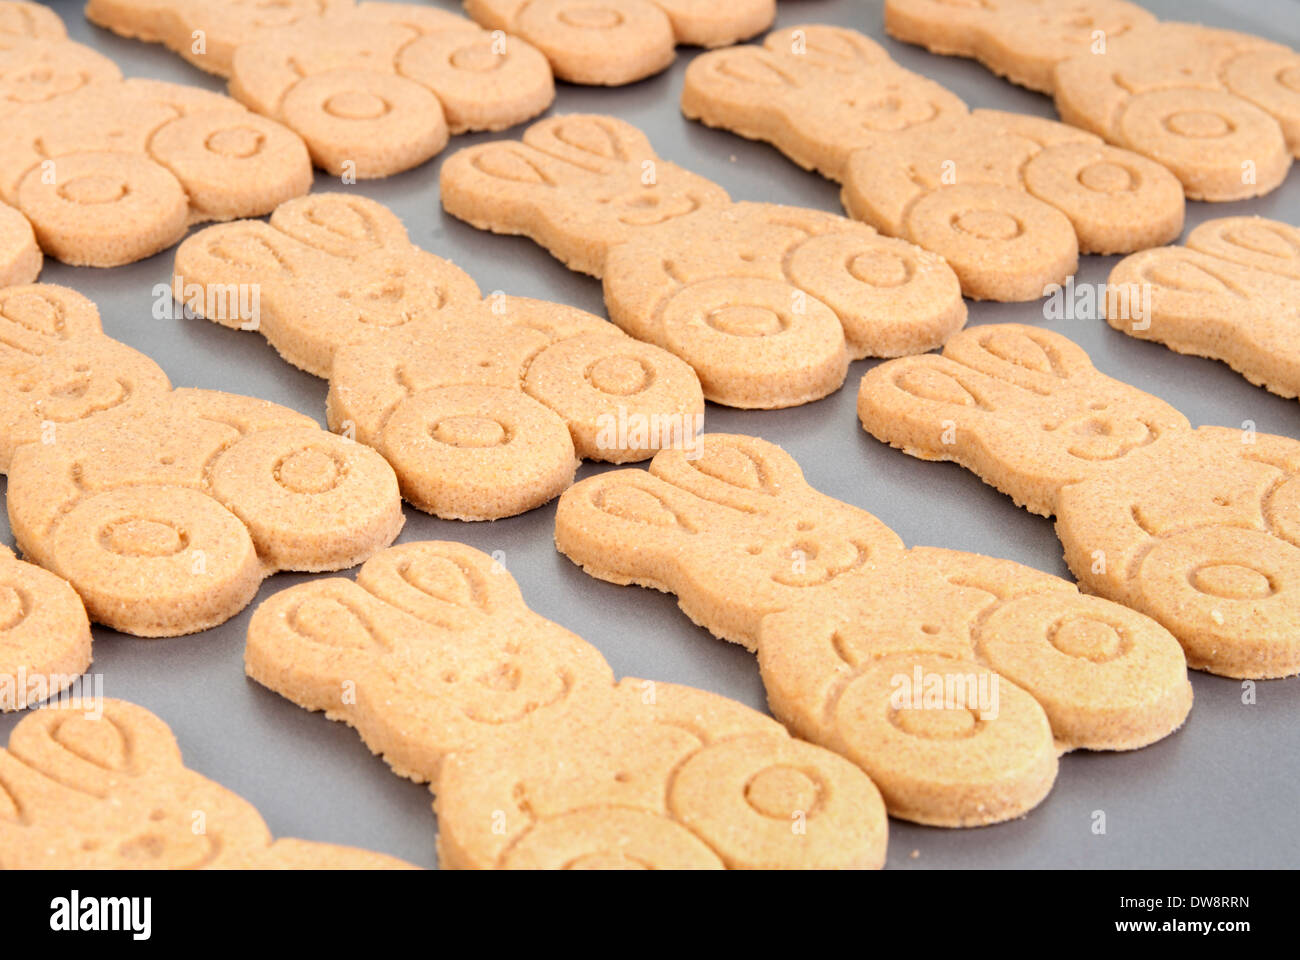 Homemade Easter gingerbread cookies on a baking tray Stock Photo